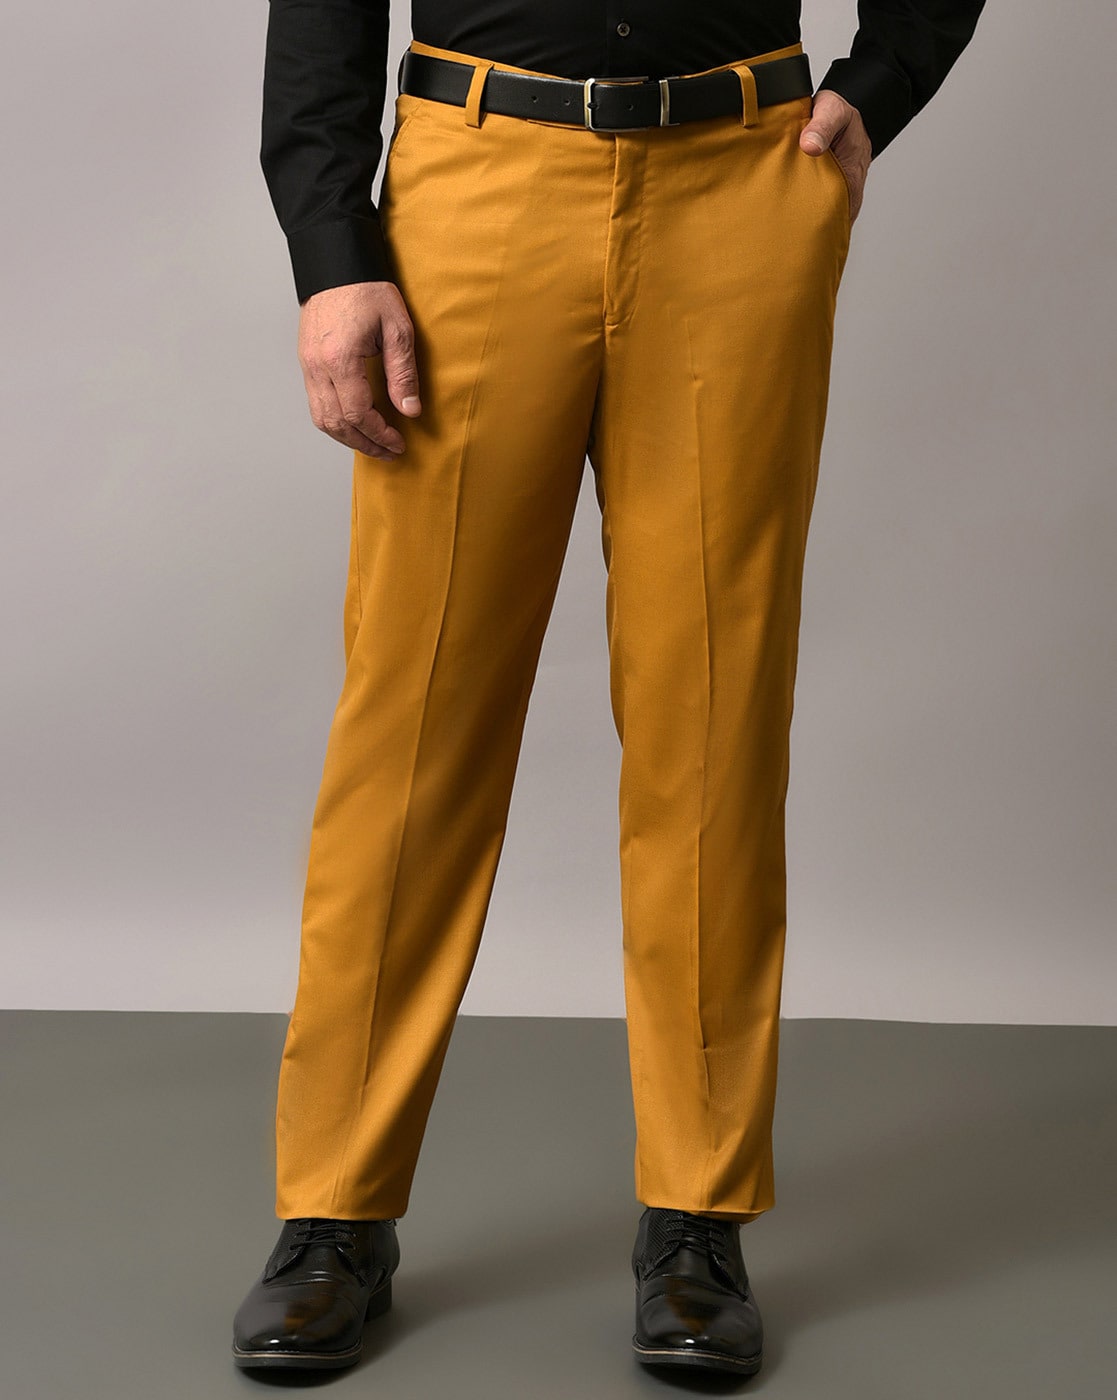 Men's Yellow Pants Outfits-35 Best Ways to Wear Yellow Pants | Mens yellow  pants, Pants outfit men, Yellow pants